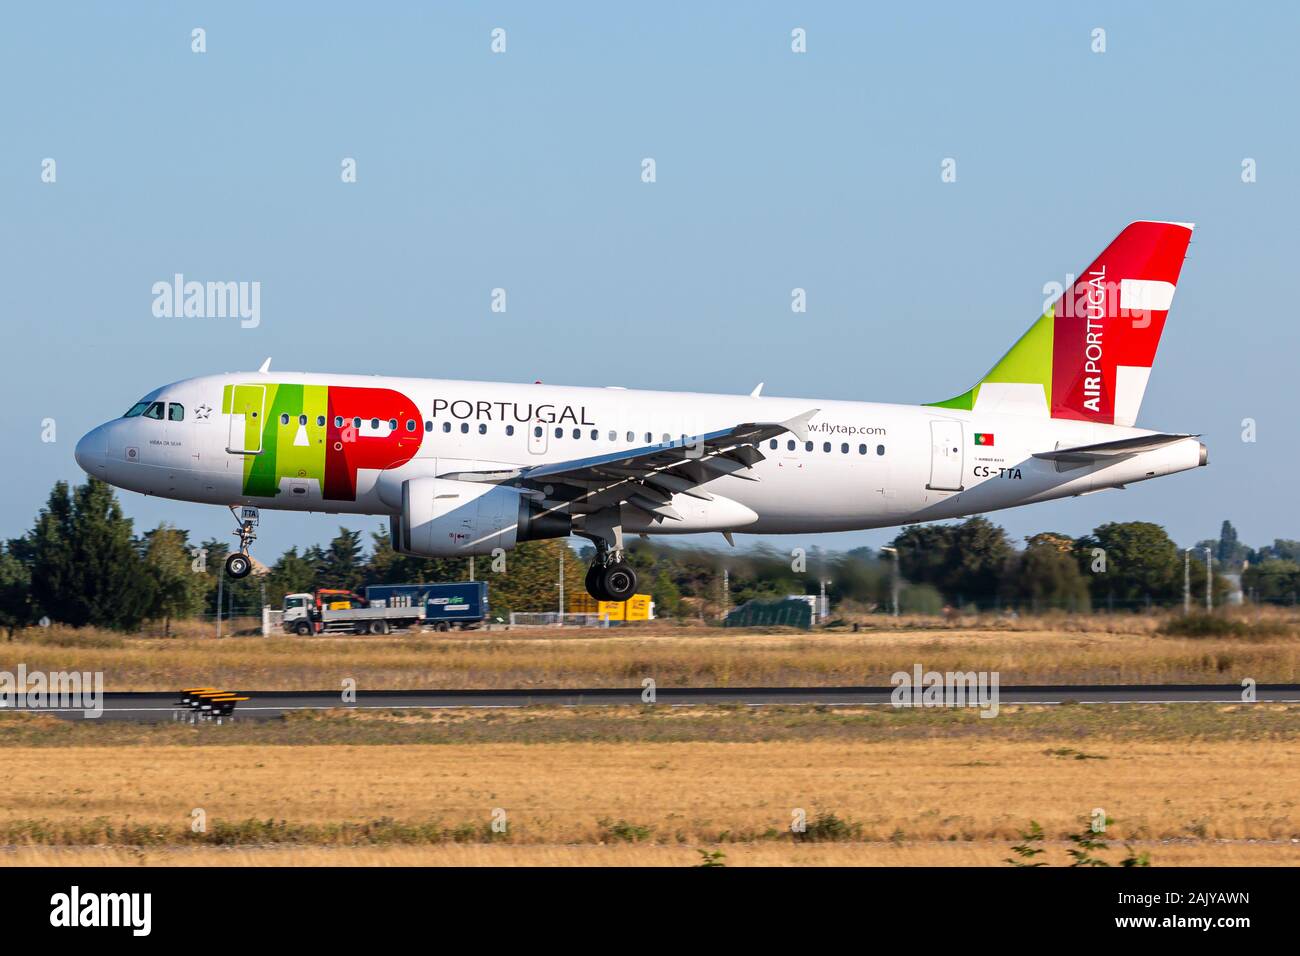 Paris, France - August 15, 2018: TAP Portugal Airbus A319 airplane at Paris  Orly airport (ORY) in France. Airbus is an aircraft manufacturer from Toul  Stock Photo - Alamy